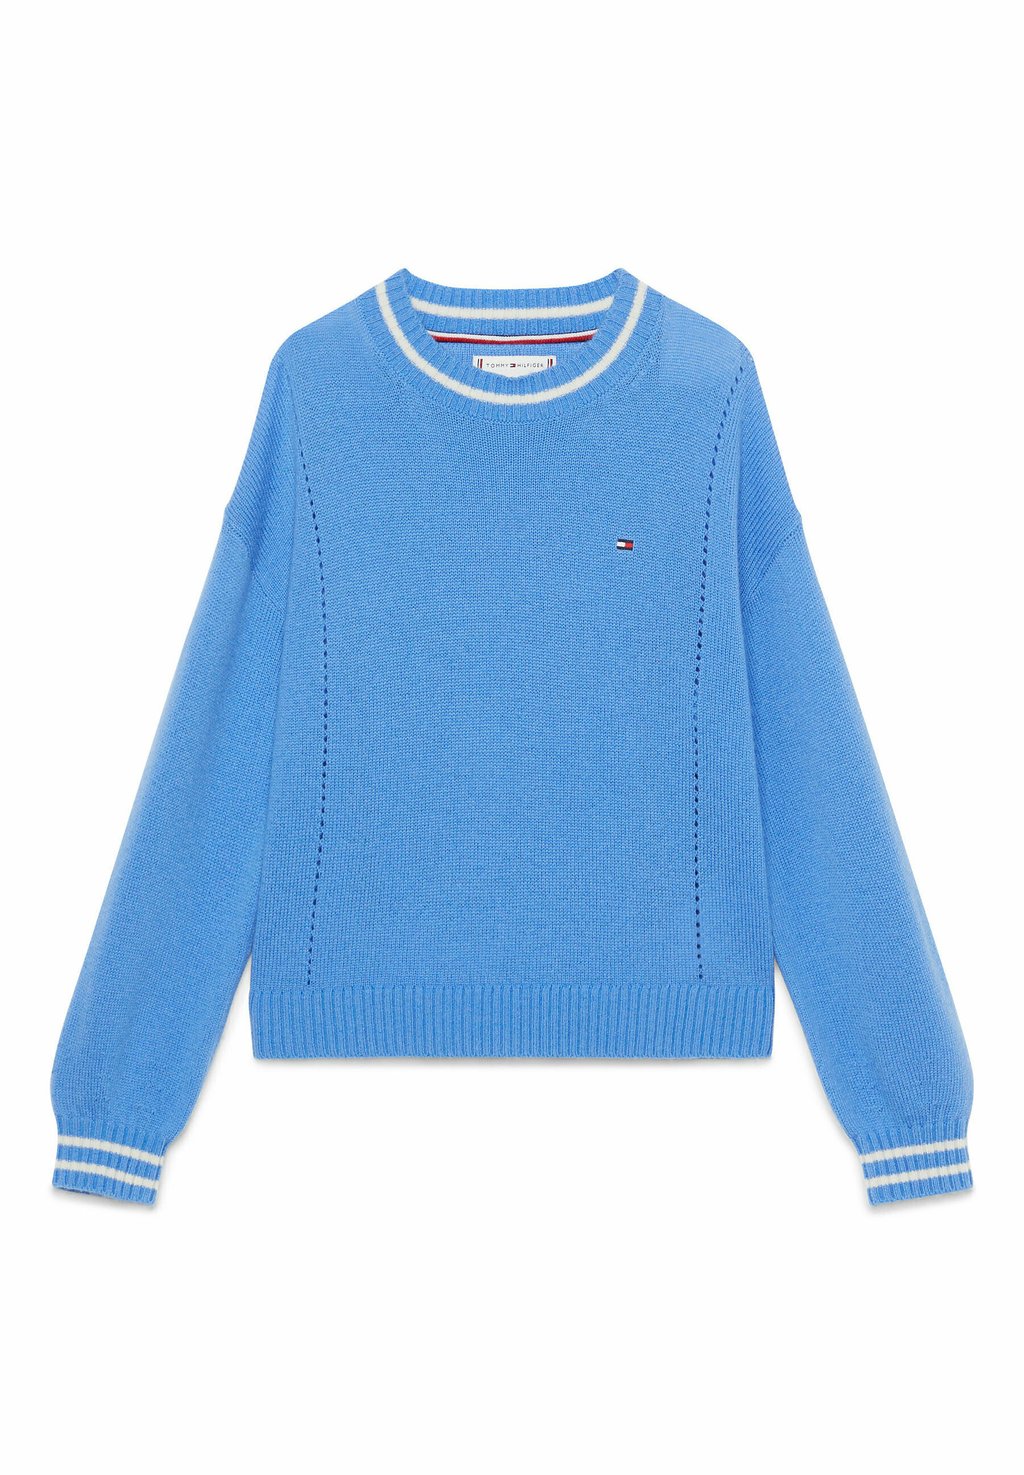 Свитер Essential Crew Neck Relaxed Tommy Hilfiger, цвет blue spell